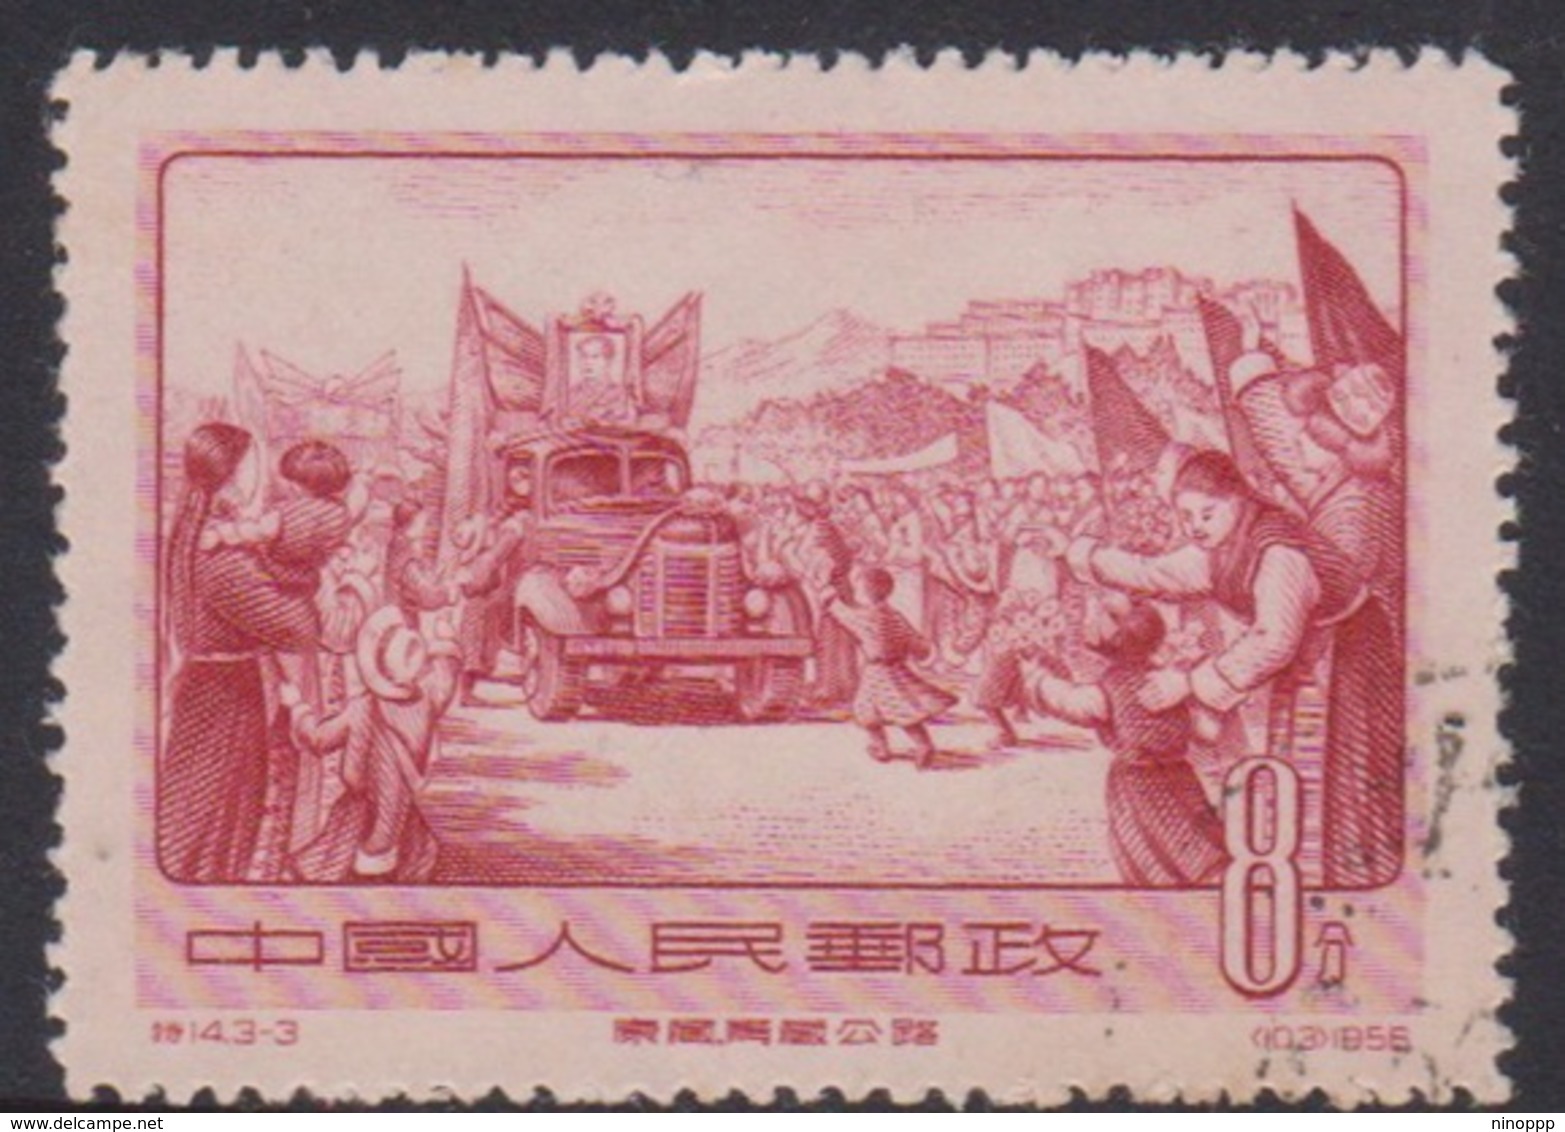 China People's Republic Scott 289 1956 Completition Chinghai-Tibret Highways,8f Brown,First Truck Arriving In Lhasa,used - Used Stamps